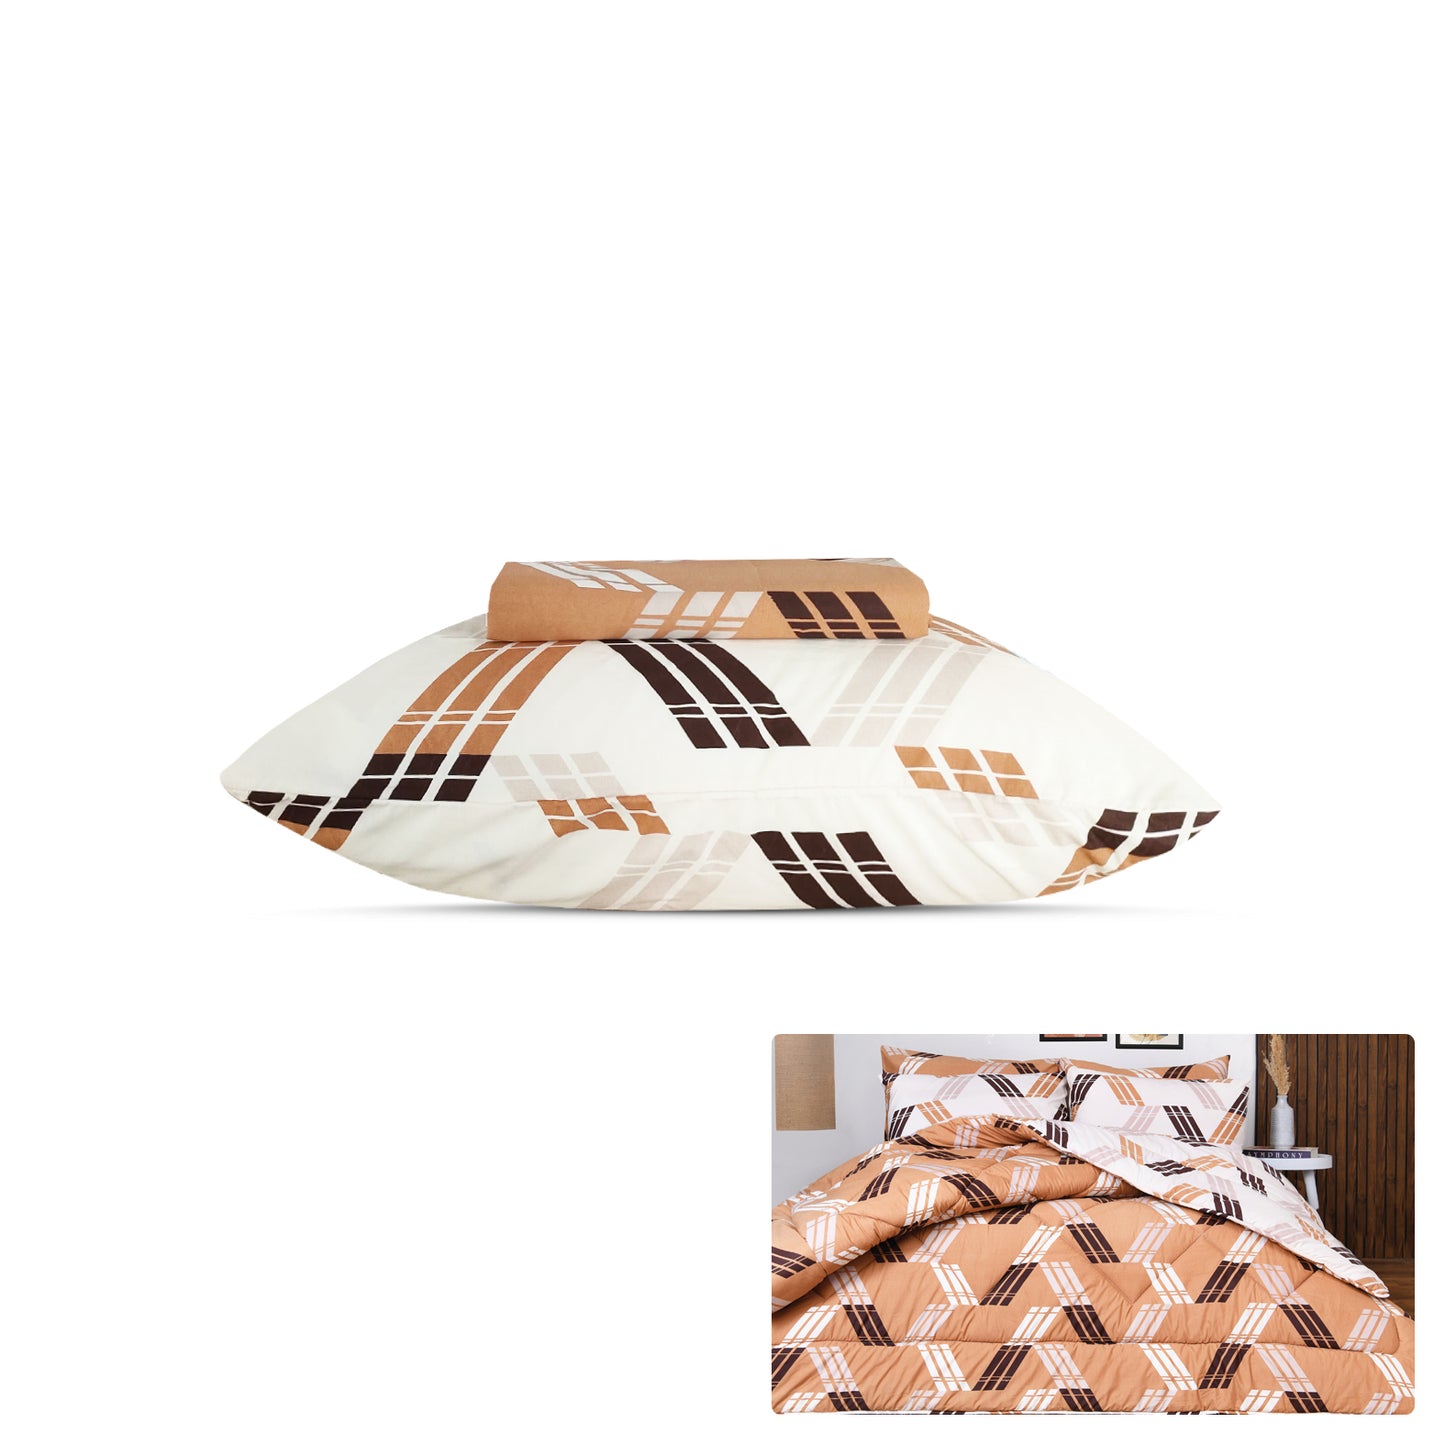 Poly Cotton Bed Sheet